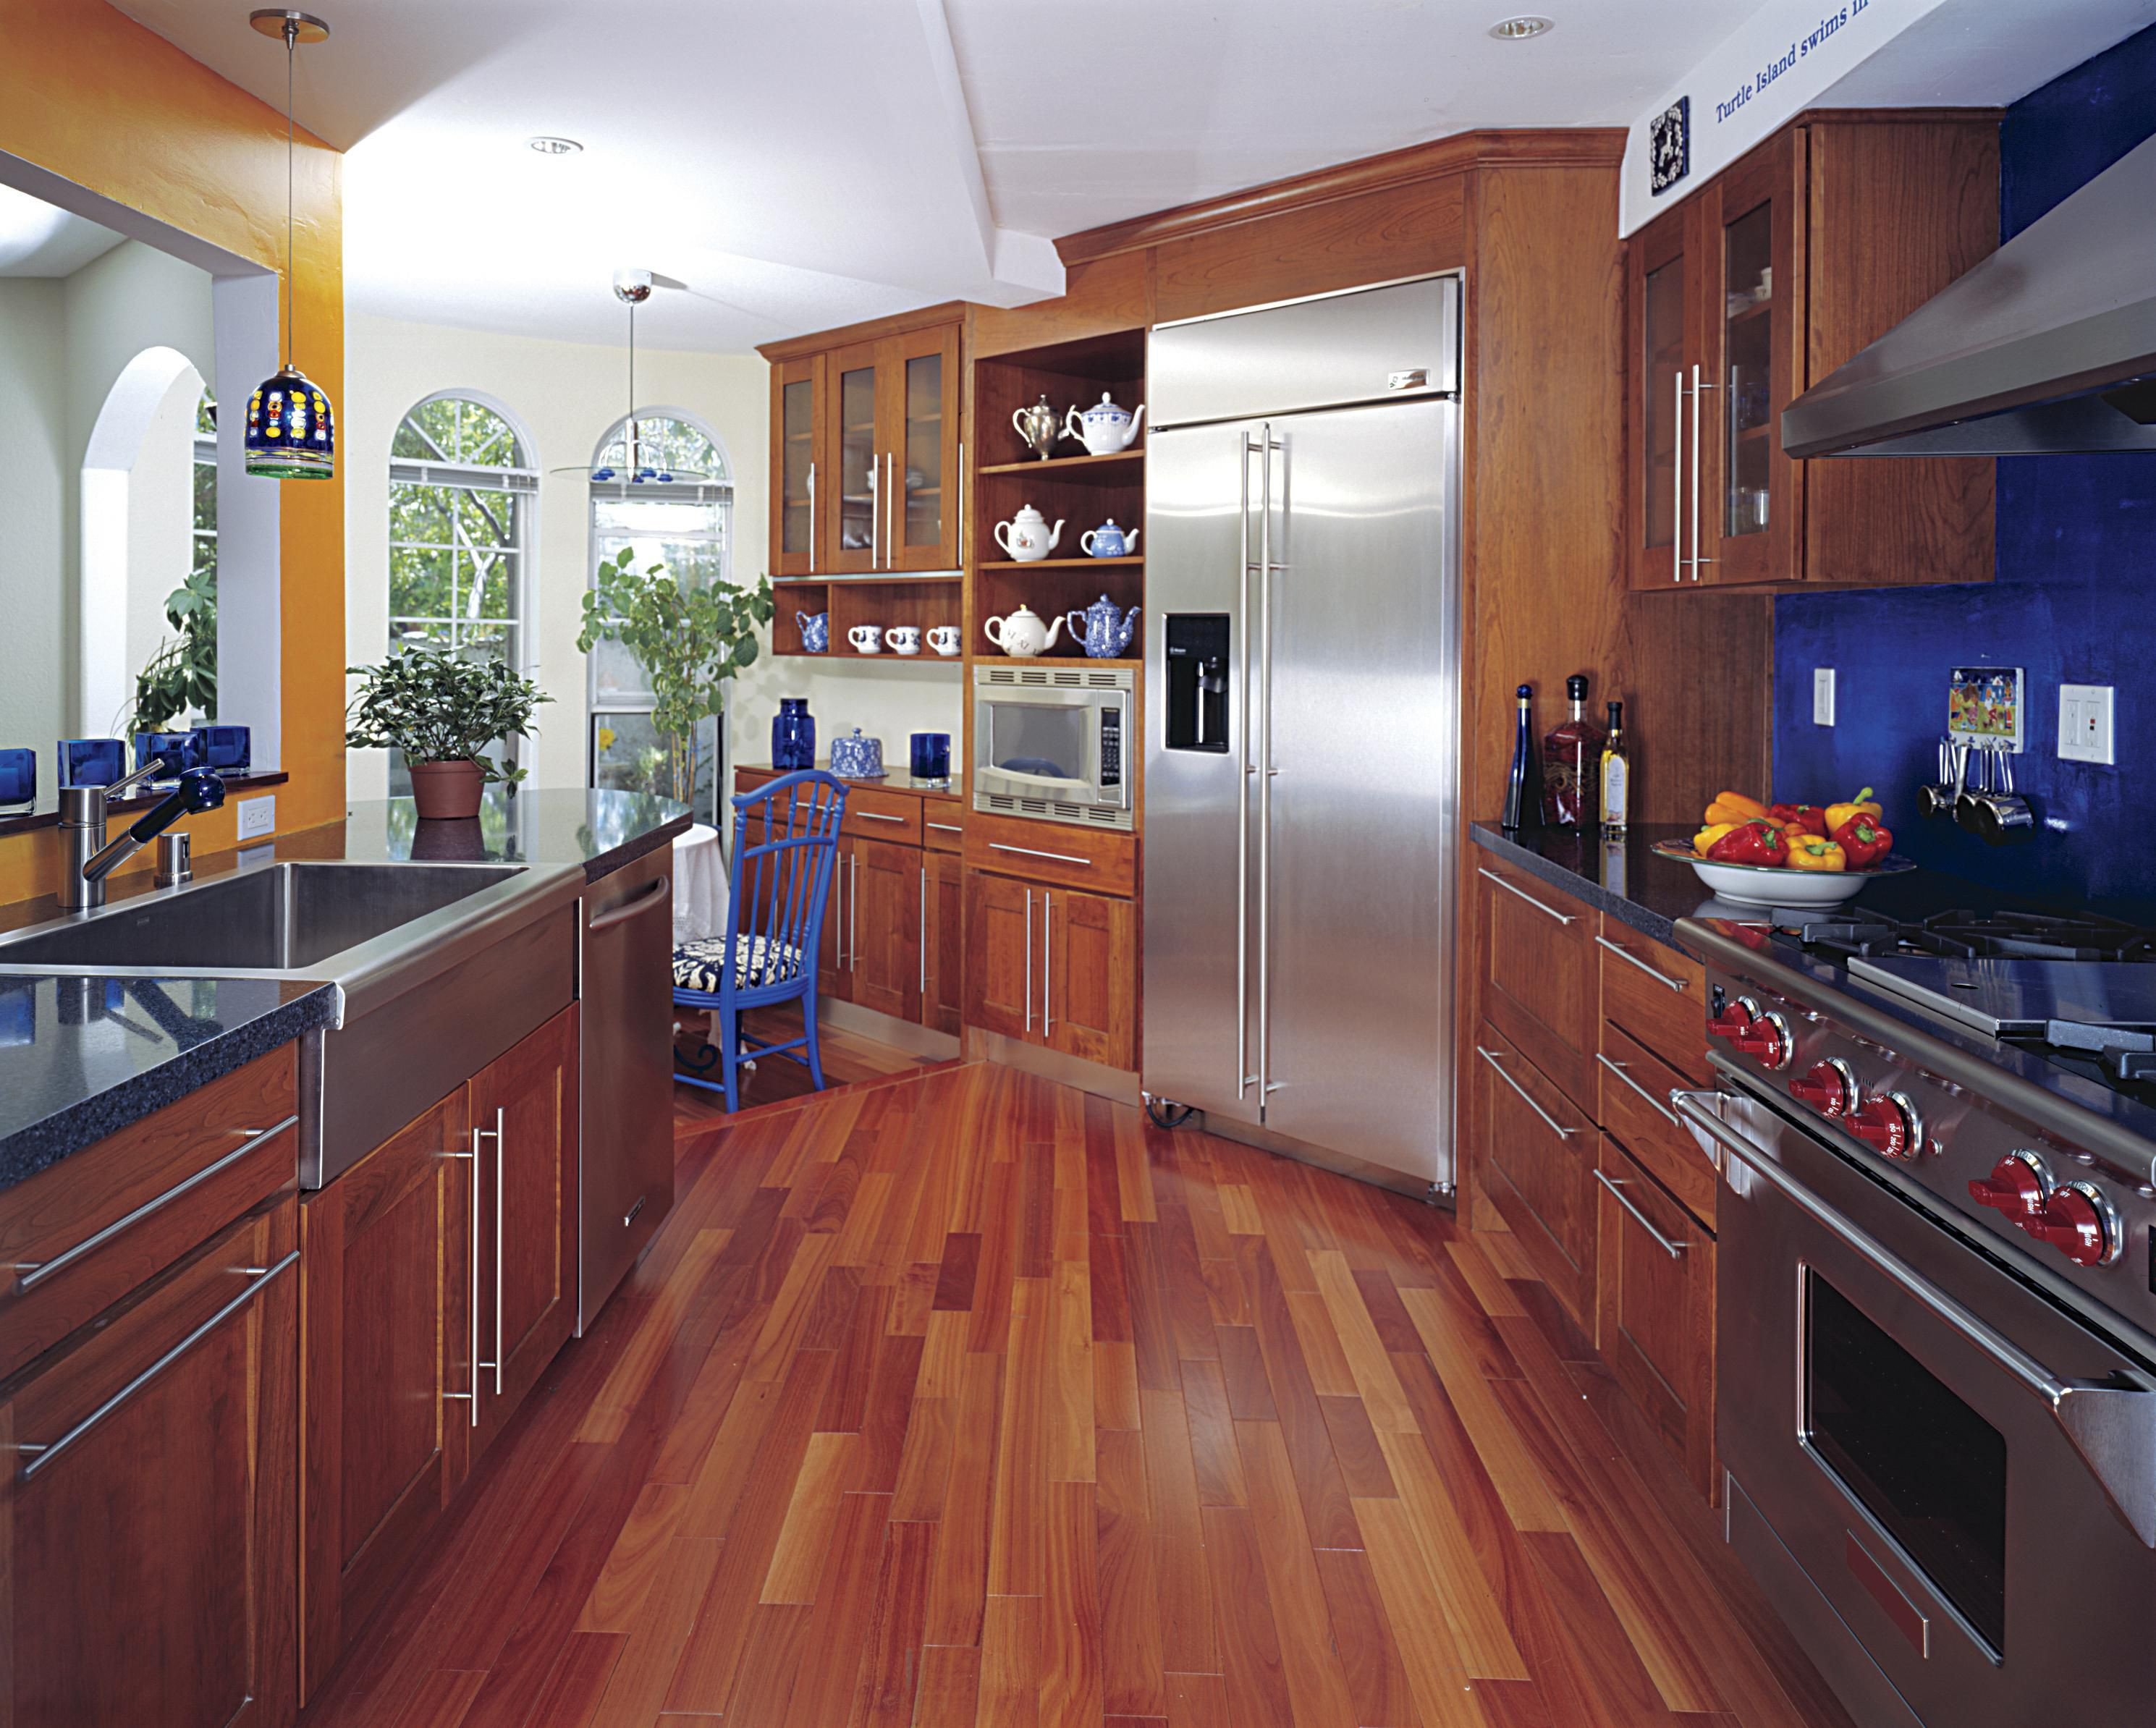 27 Amazing Hardwood Floor Finishing Near Me 2023 free download hardwood floor finishing near me of hardwood floor in a kitchen is this allowed throughout 186828472 56a49f3a5f9b58b7d0d7e142